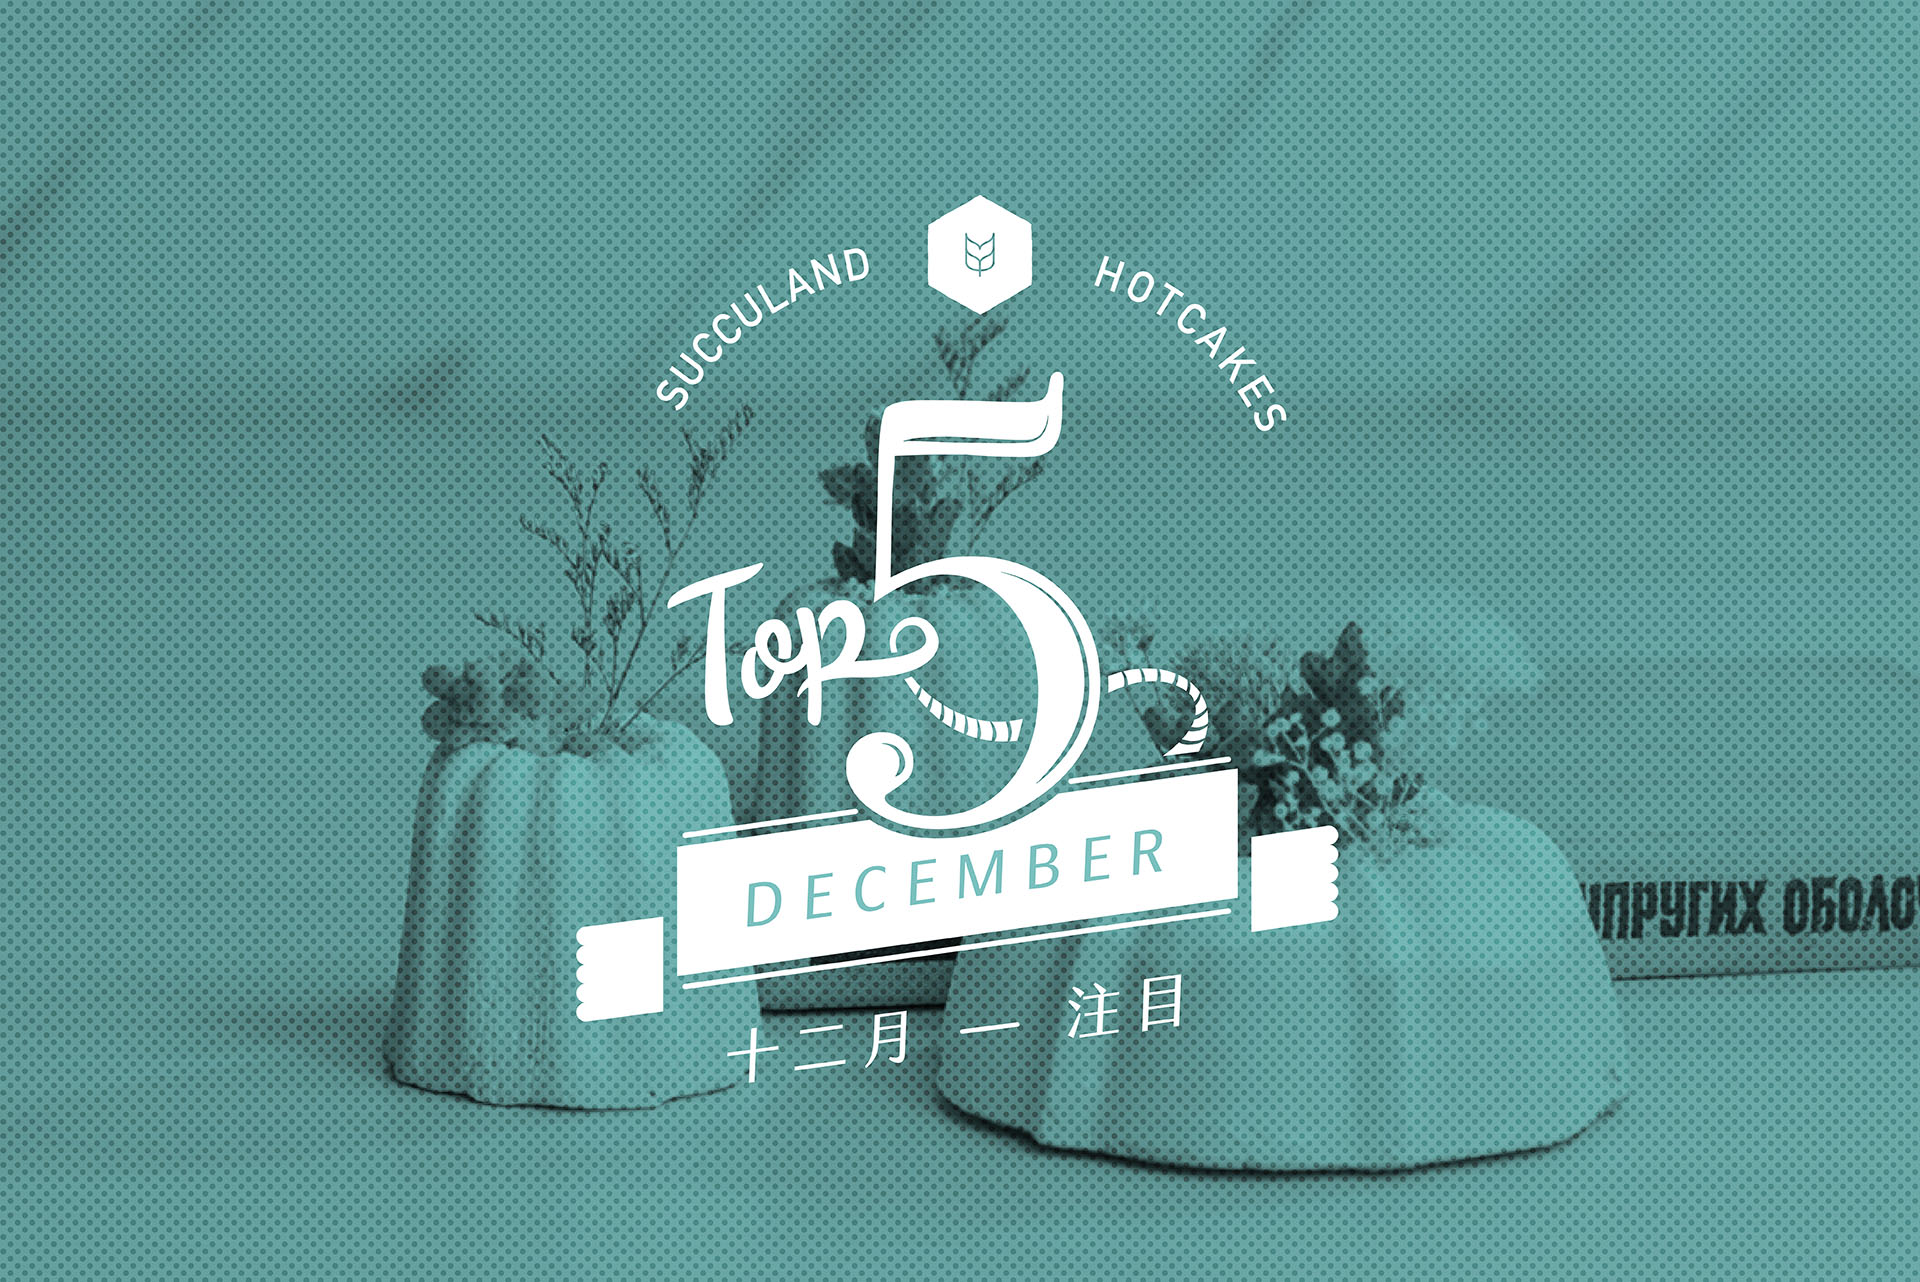 Read more about the article 有肉 2016 年 12 月開幕送禮盆栽 TOP 5